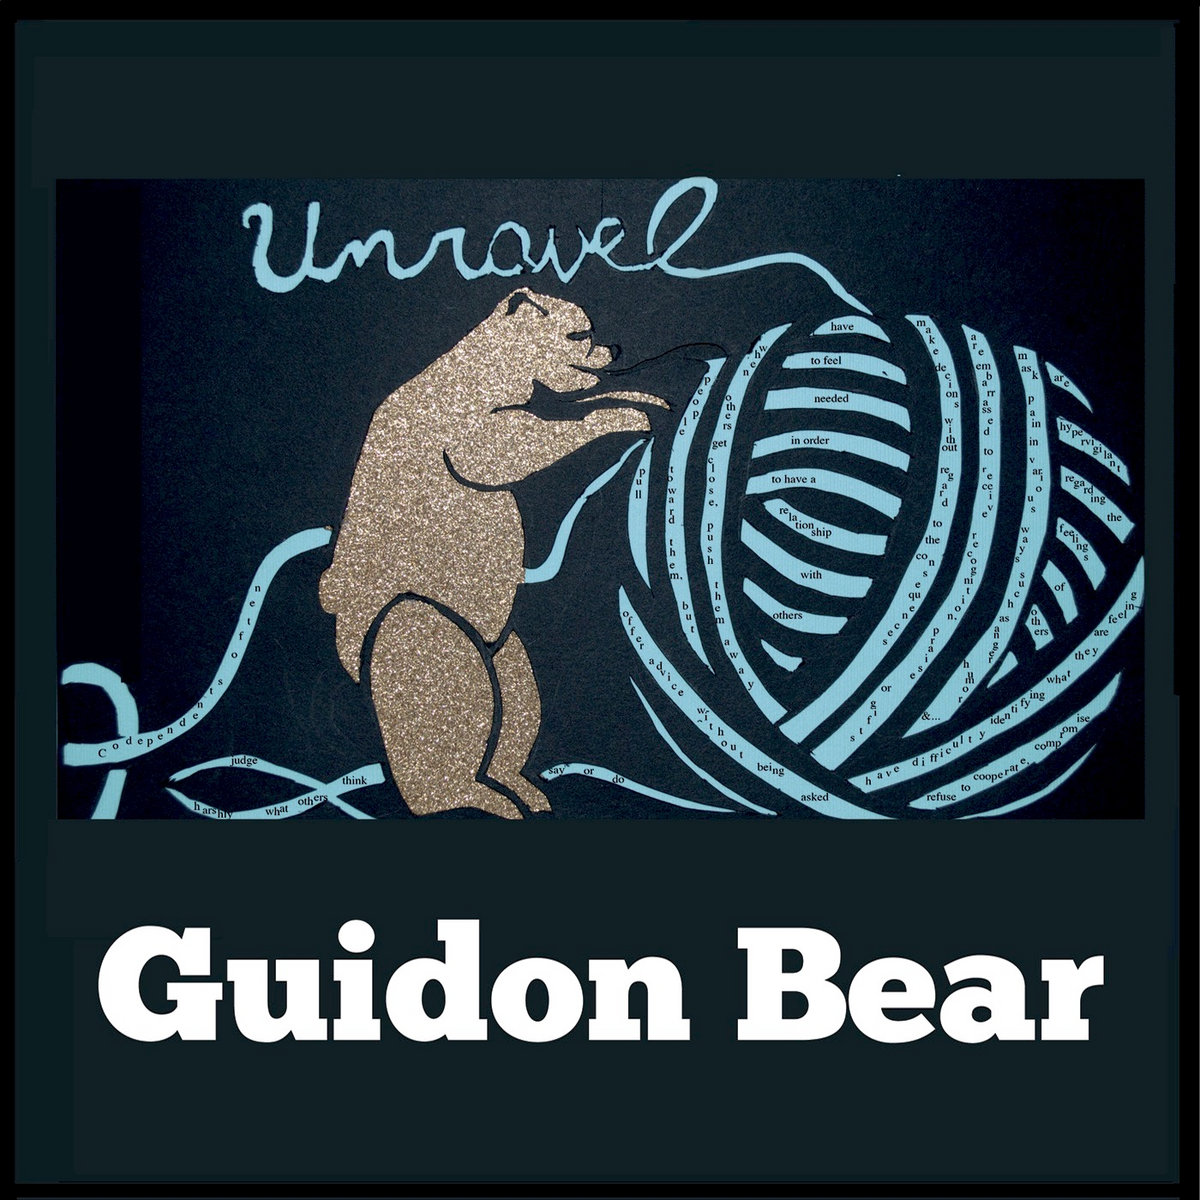 A bear with a blue ball of yarn with the text Unravel, Guidon Bear